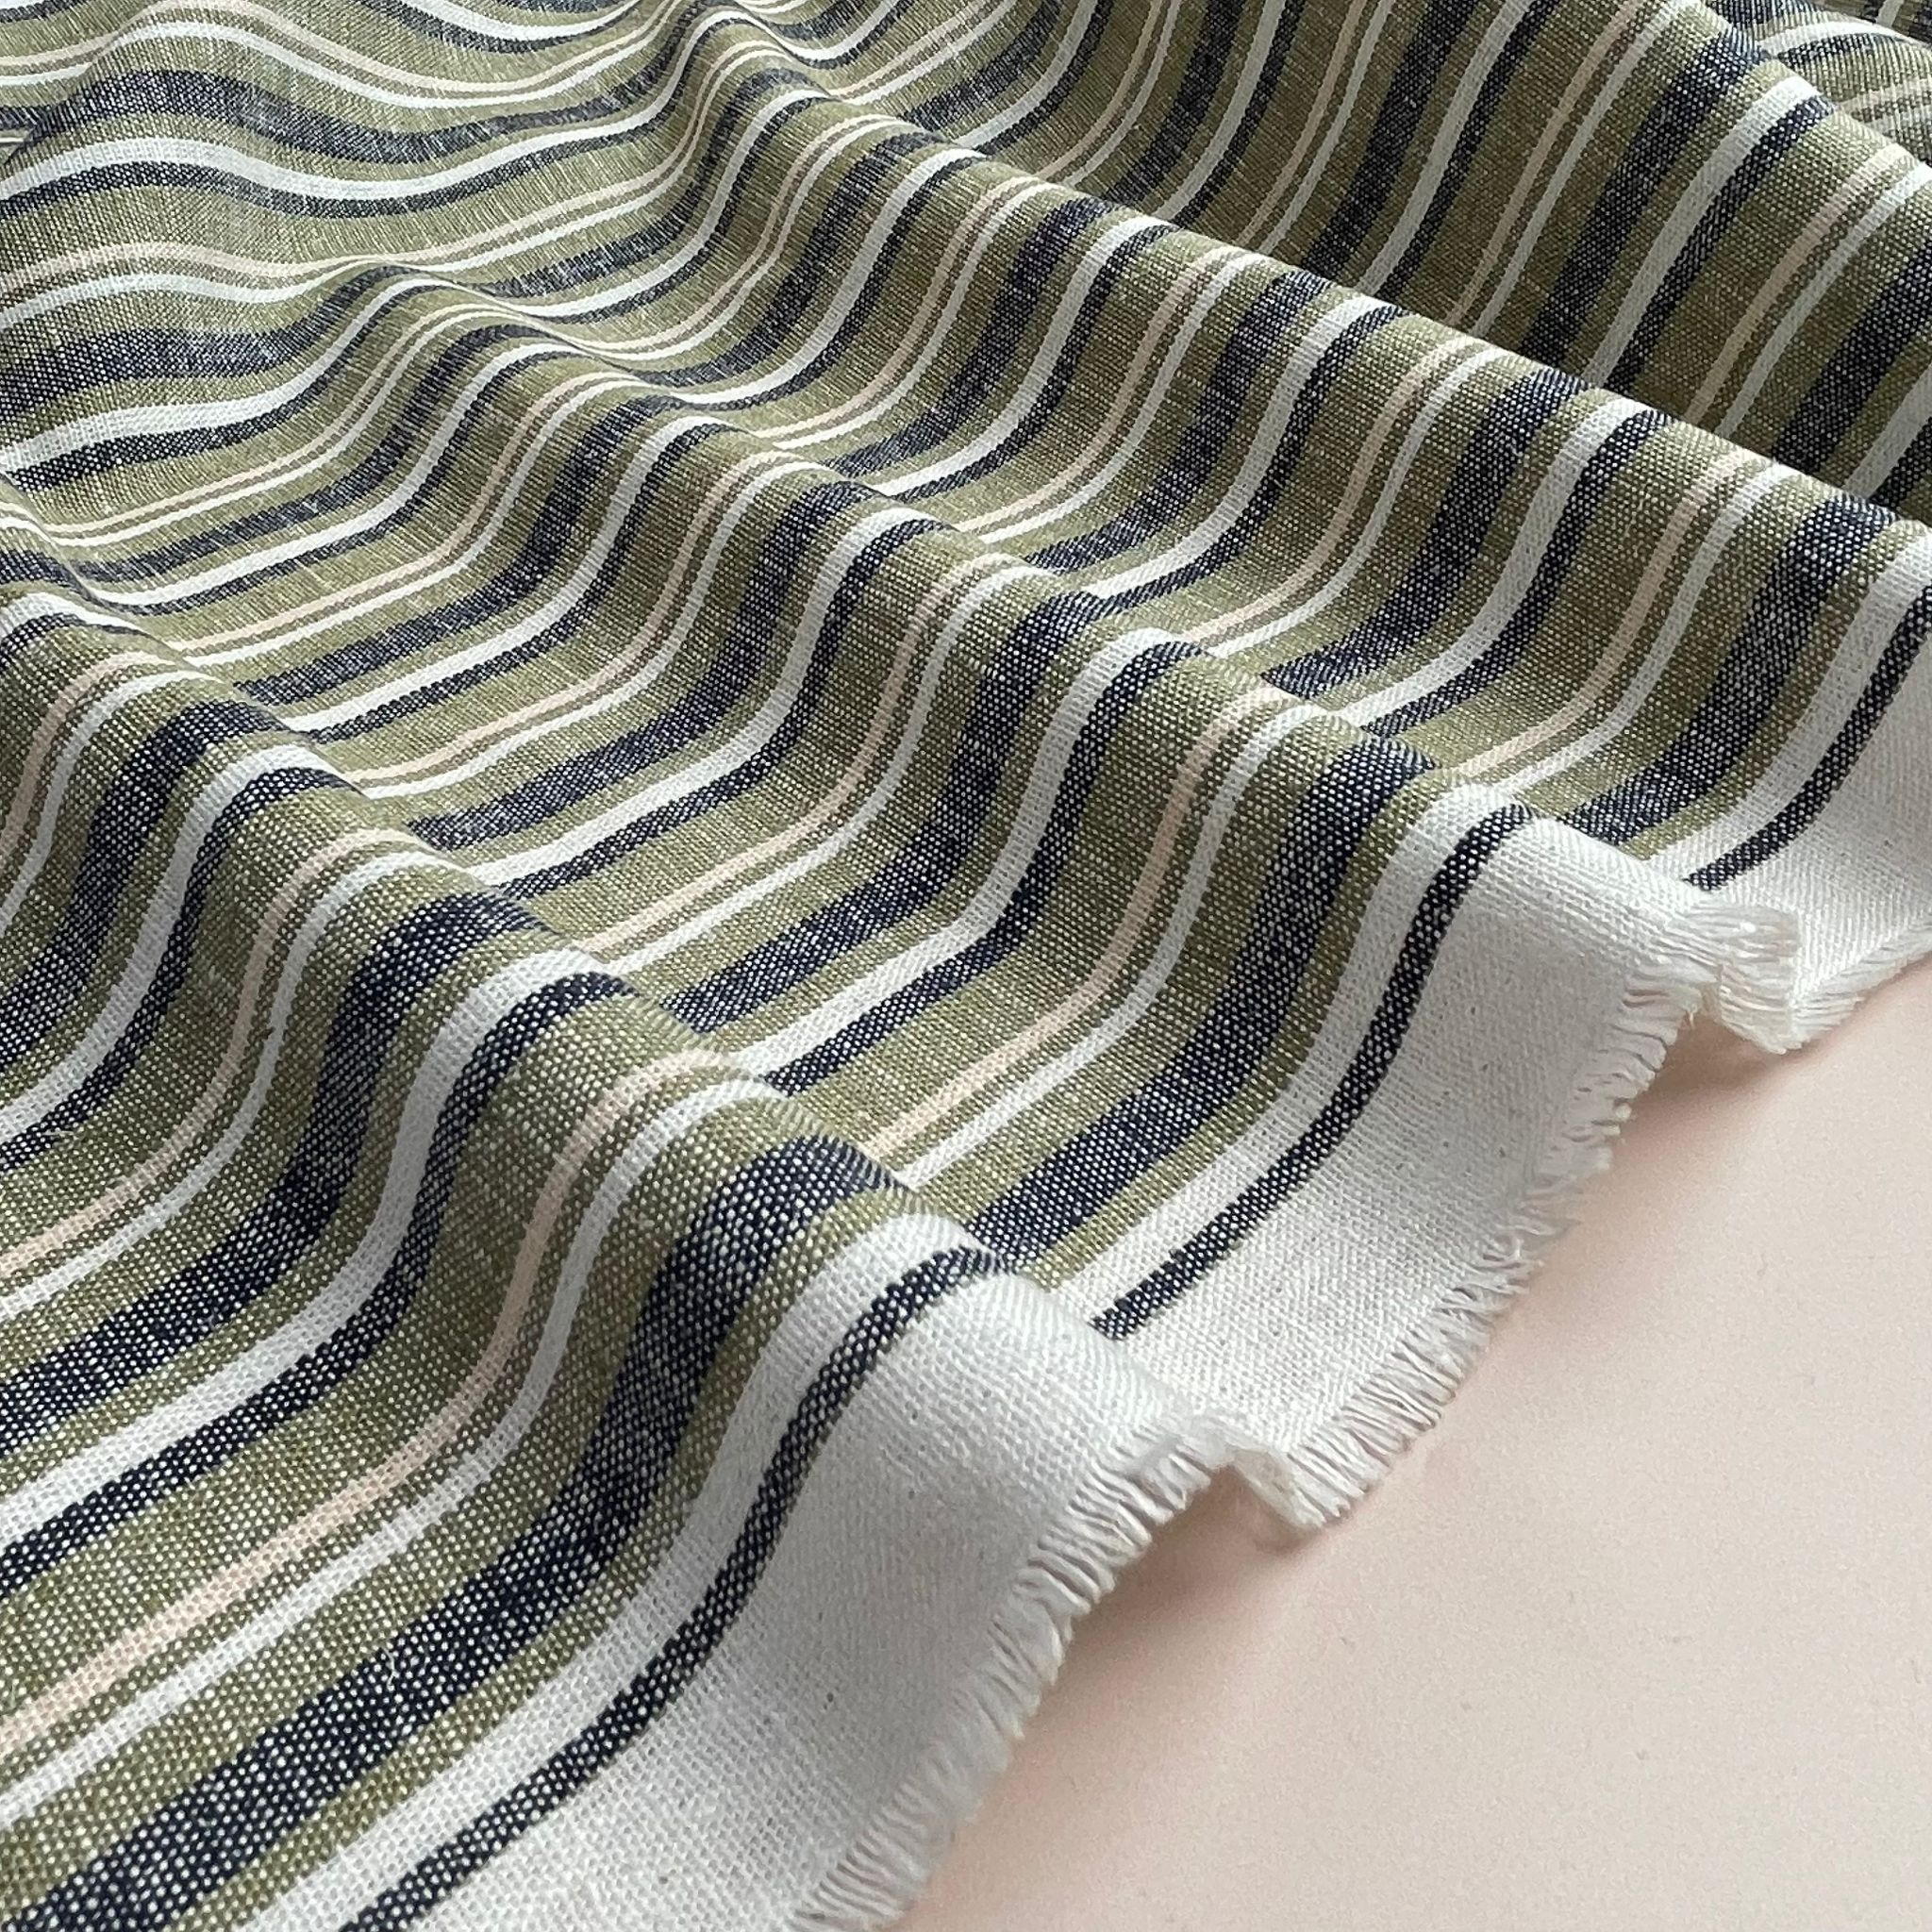 Yarn Dyed Striped LInen Viscose Blend Fabric in Olive & Navy